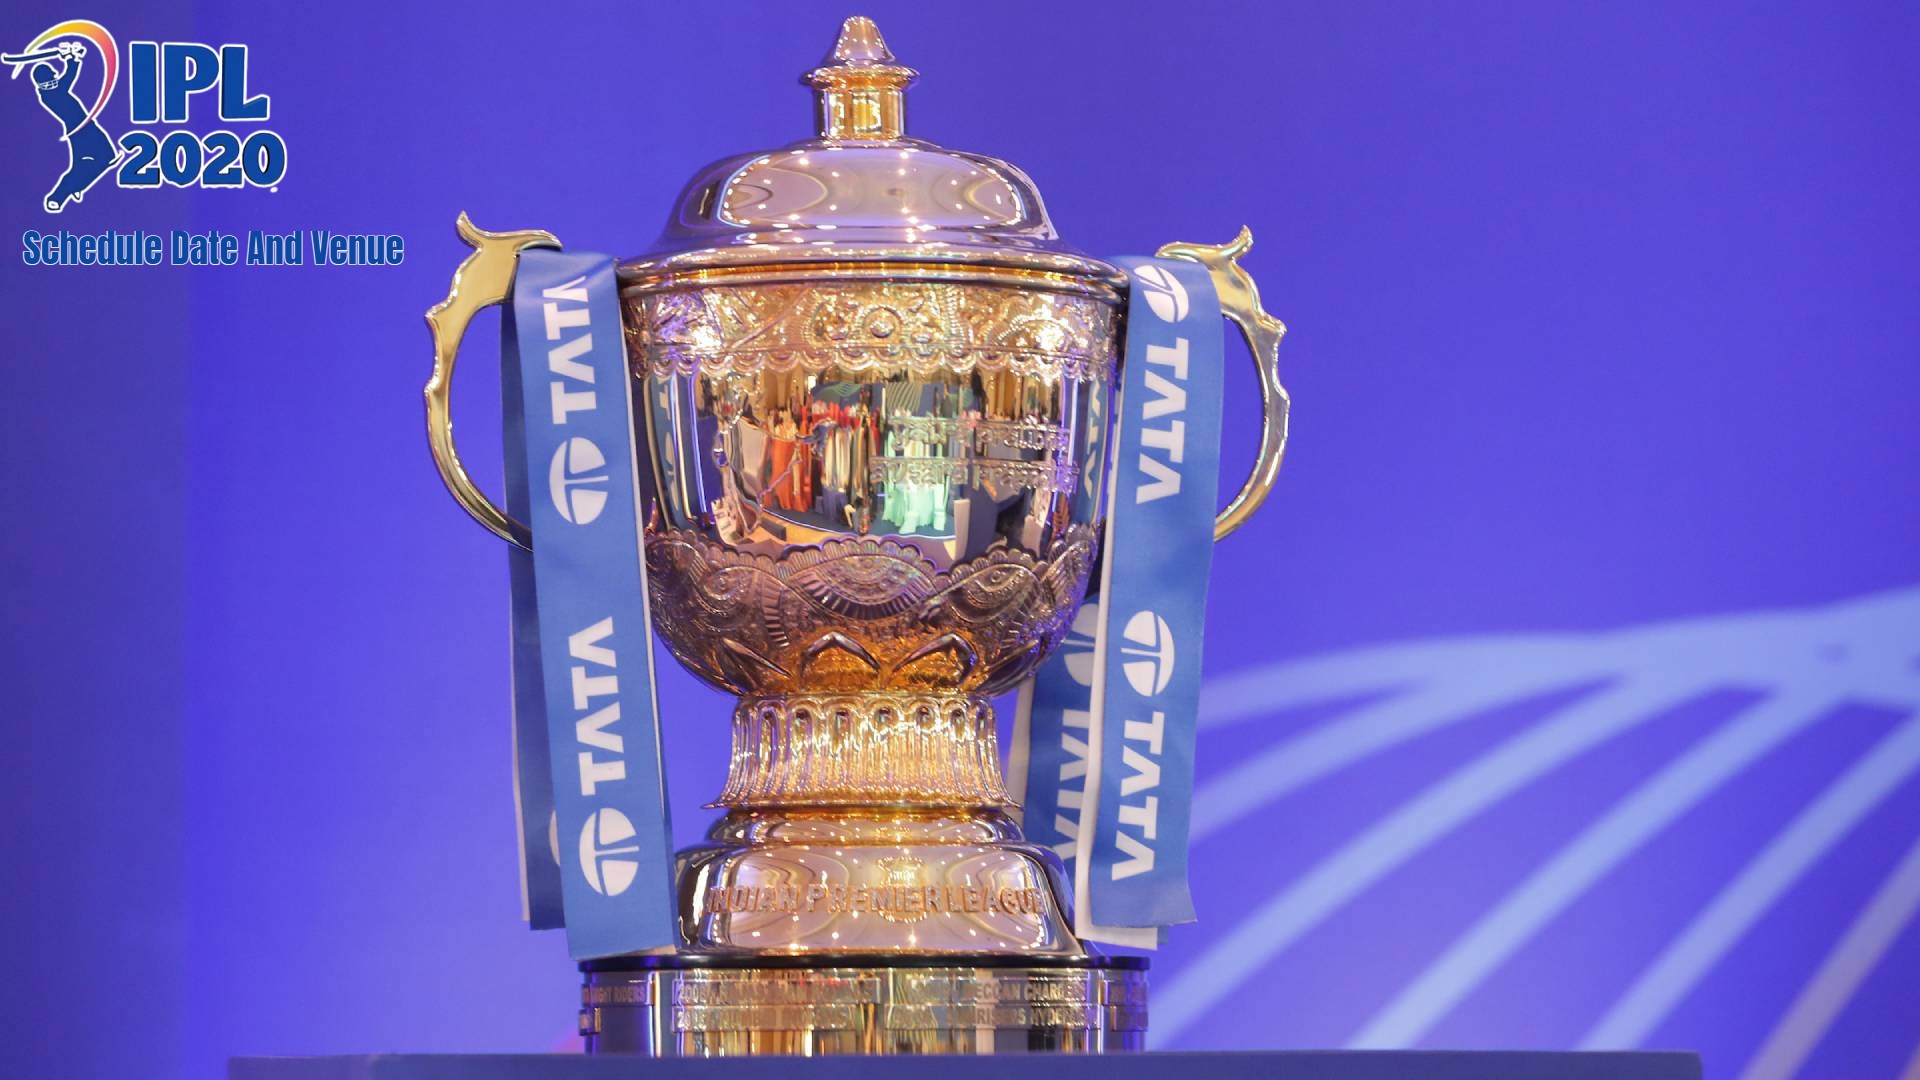 You are currently viewing IPL 2022 Schedule Date And Venue